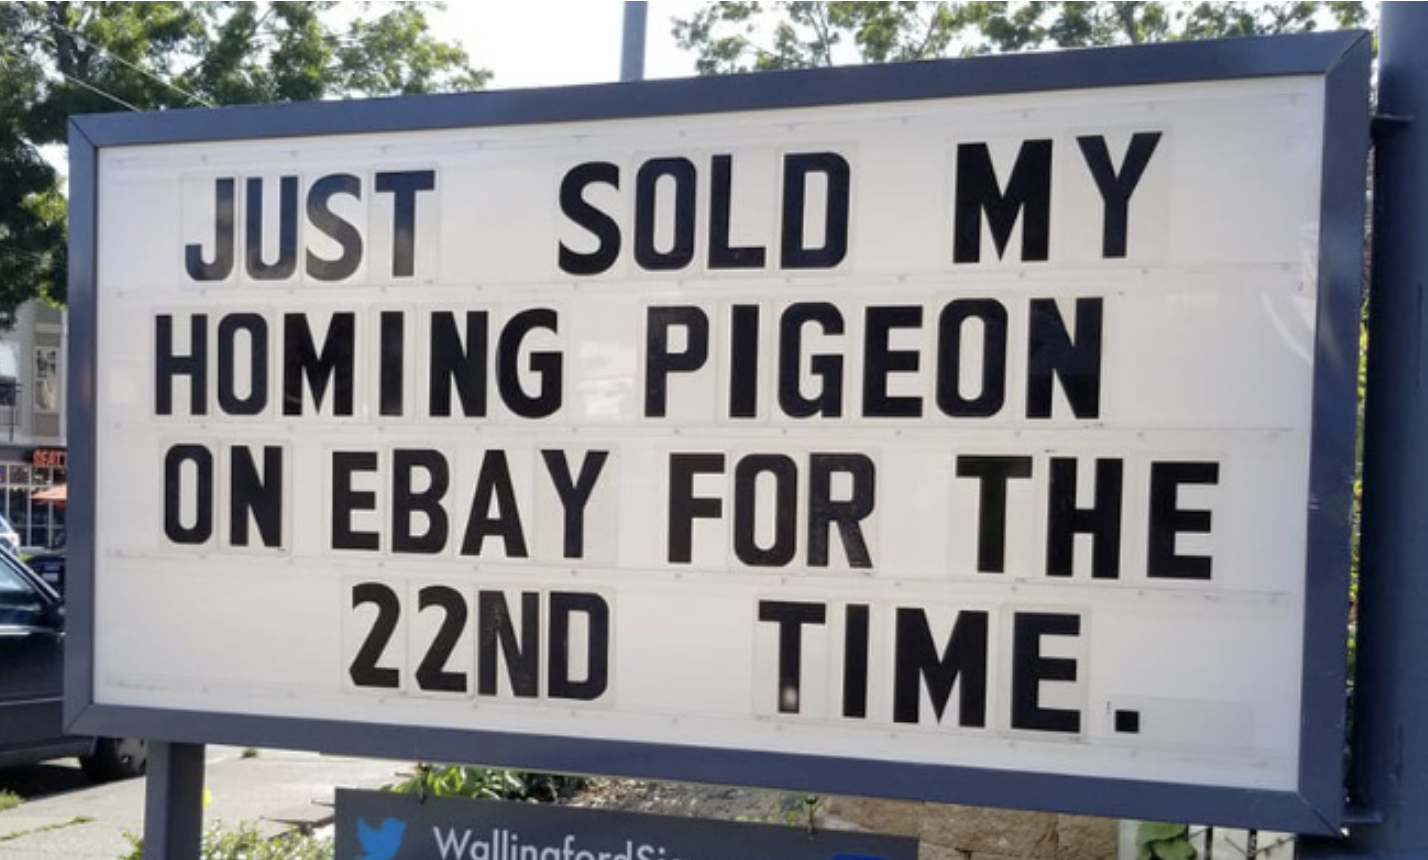 &quot;Just sold my homing pigeon on eBay for the 22nd time.&quot;